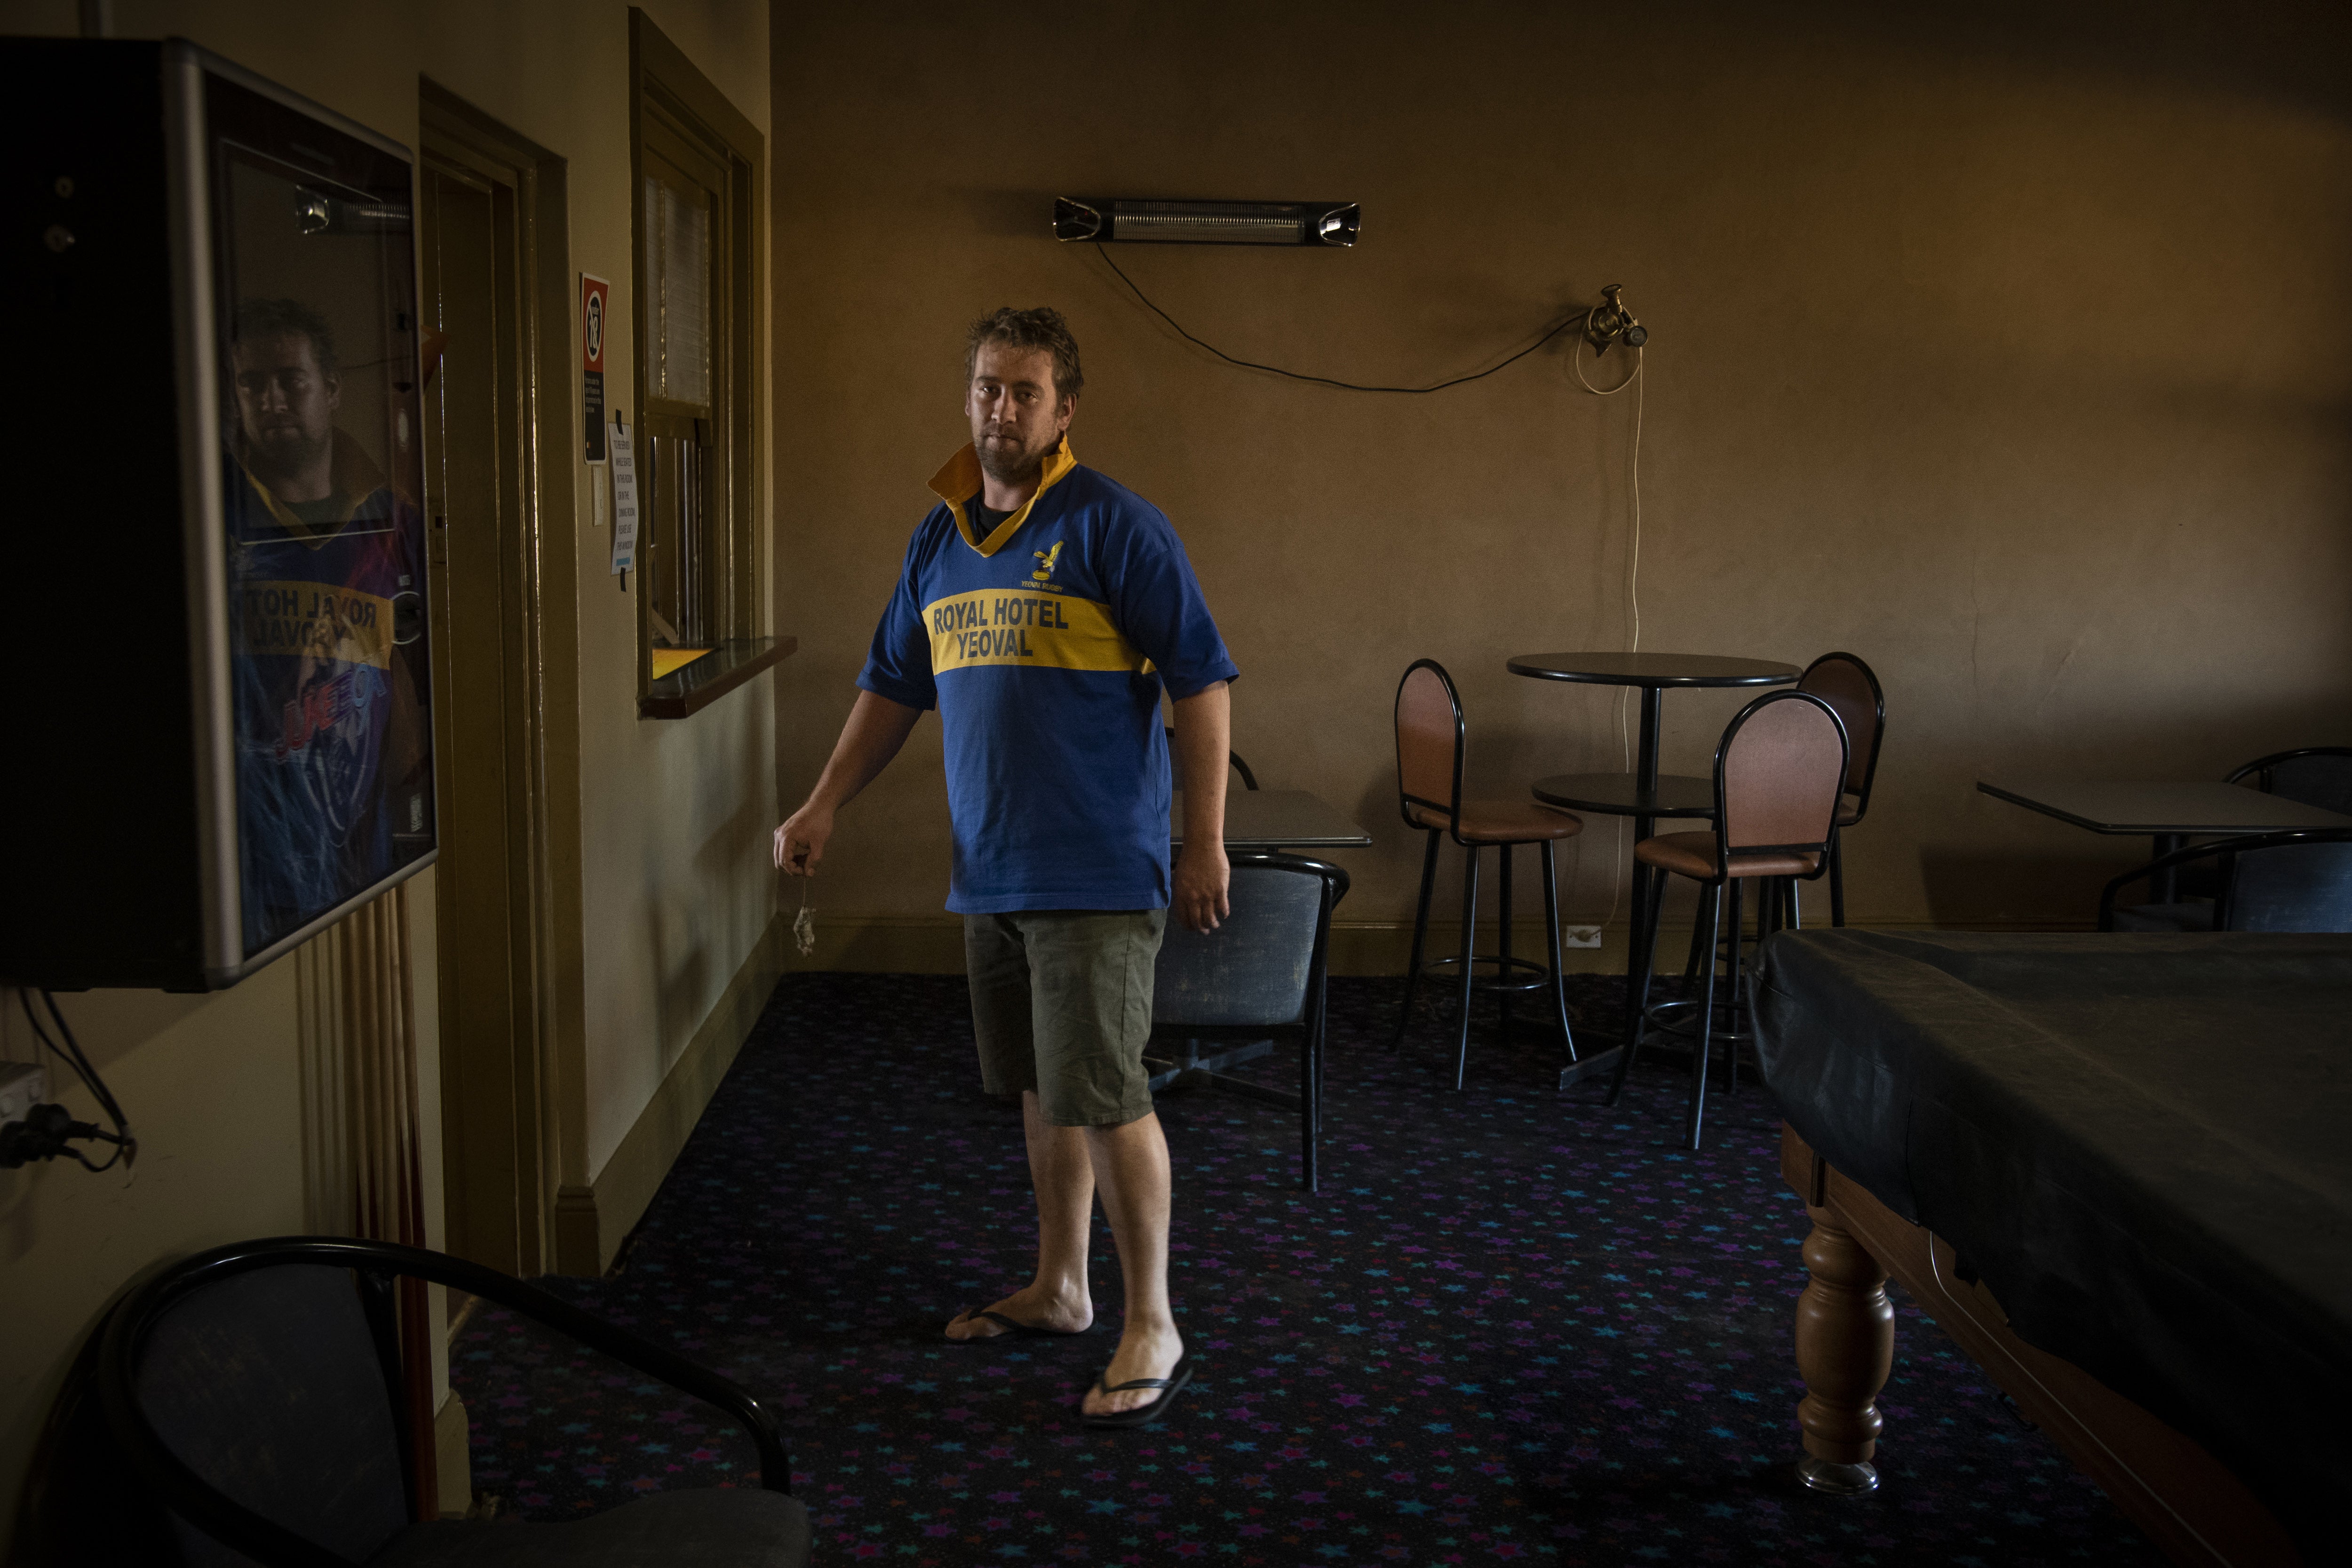 Mark Iles, publican at the Royal Hotel, holds a dead mouse in Yoeval, New South Wales, Australia on 28 May 2021